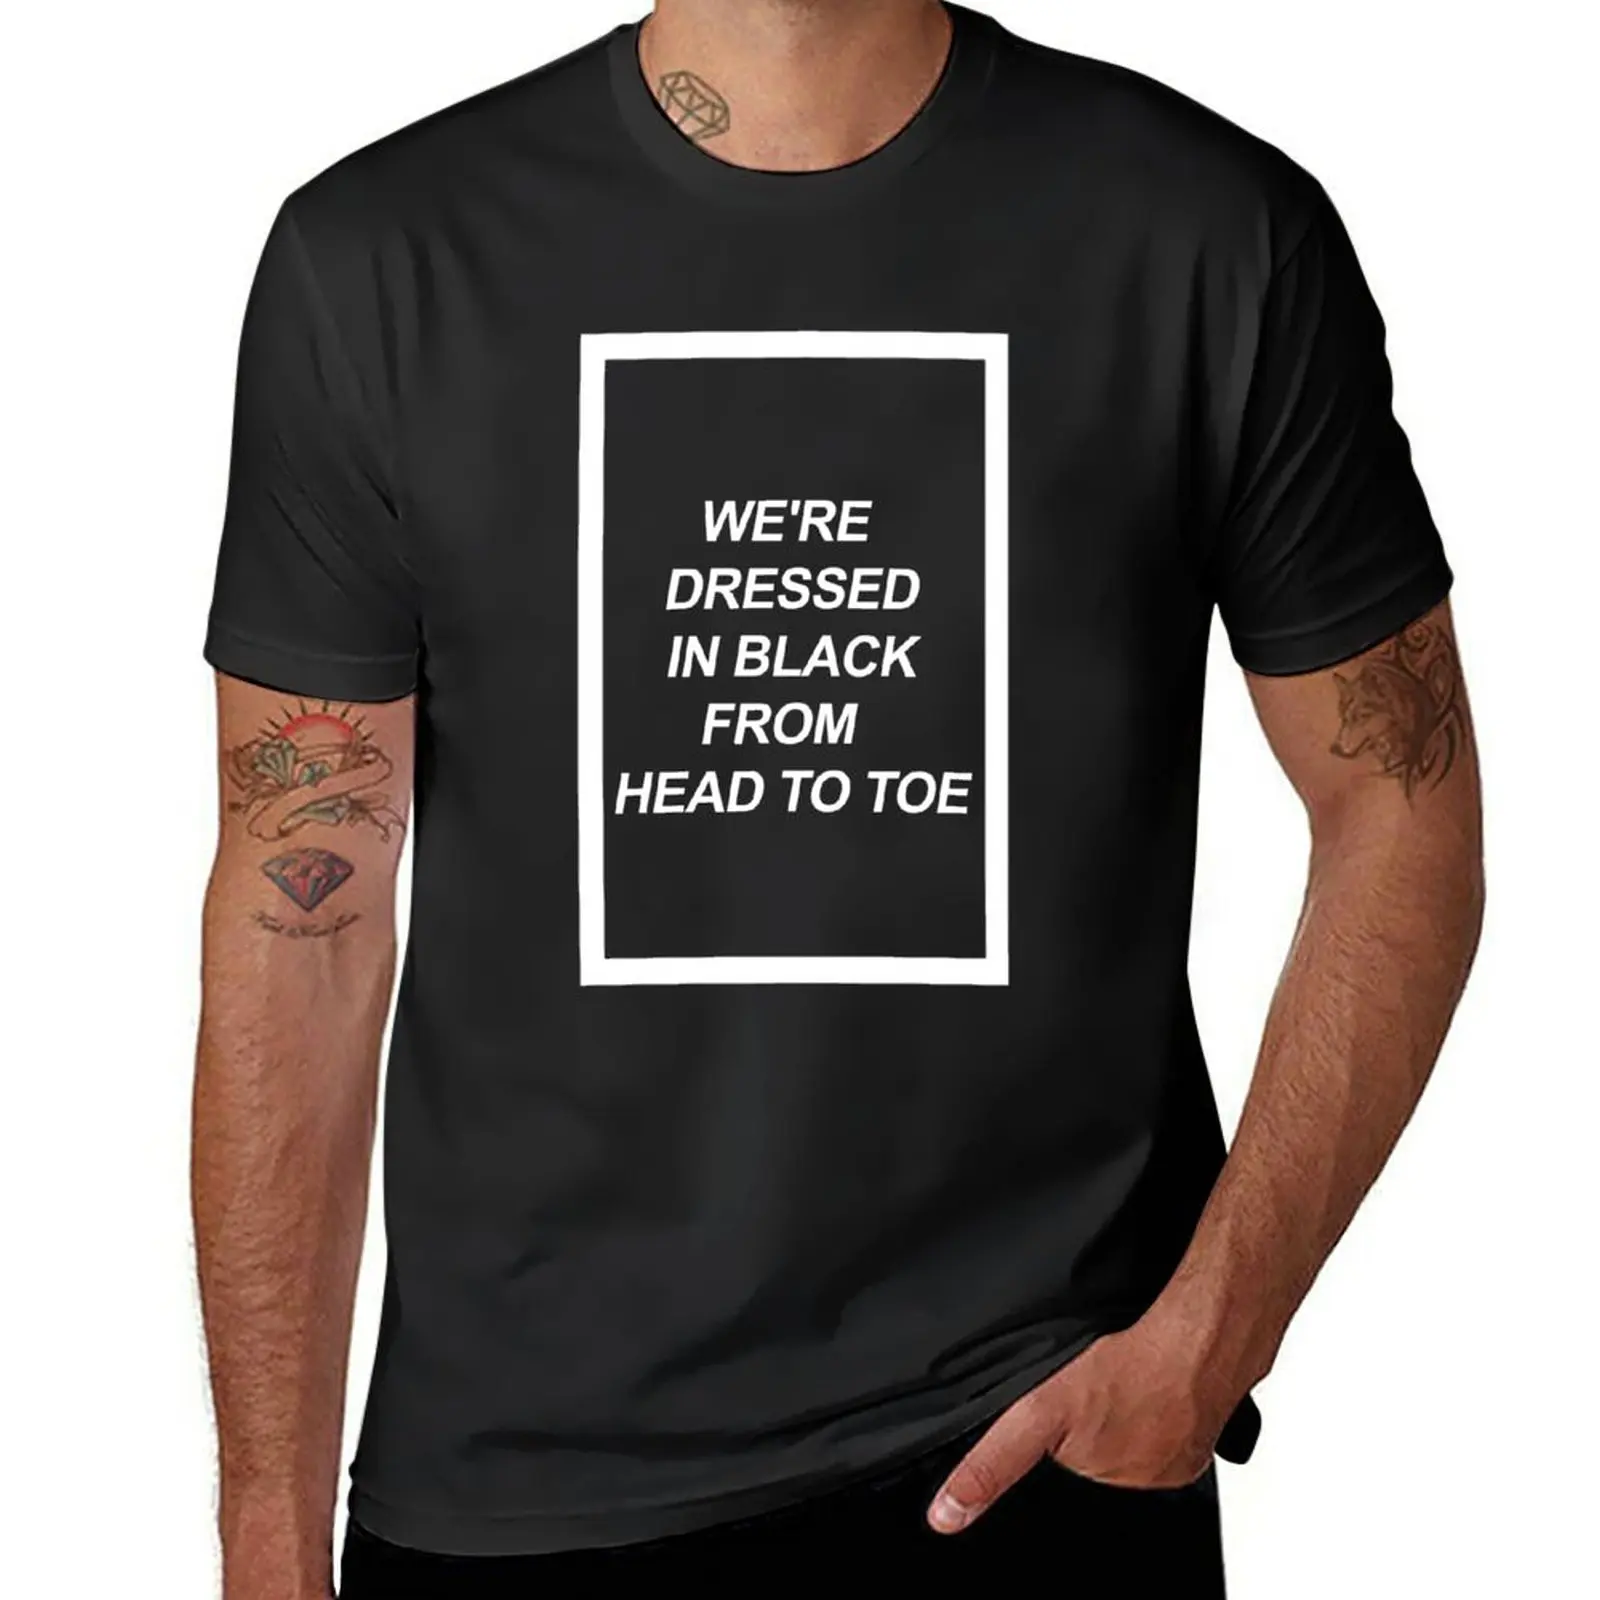 

We're dressed in black. T-Shirt graphics plus sizes new edition Short sleeve tee funny t shirts for men